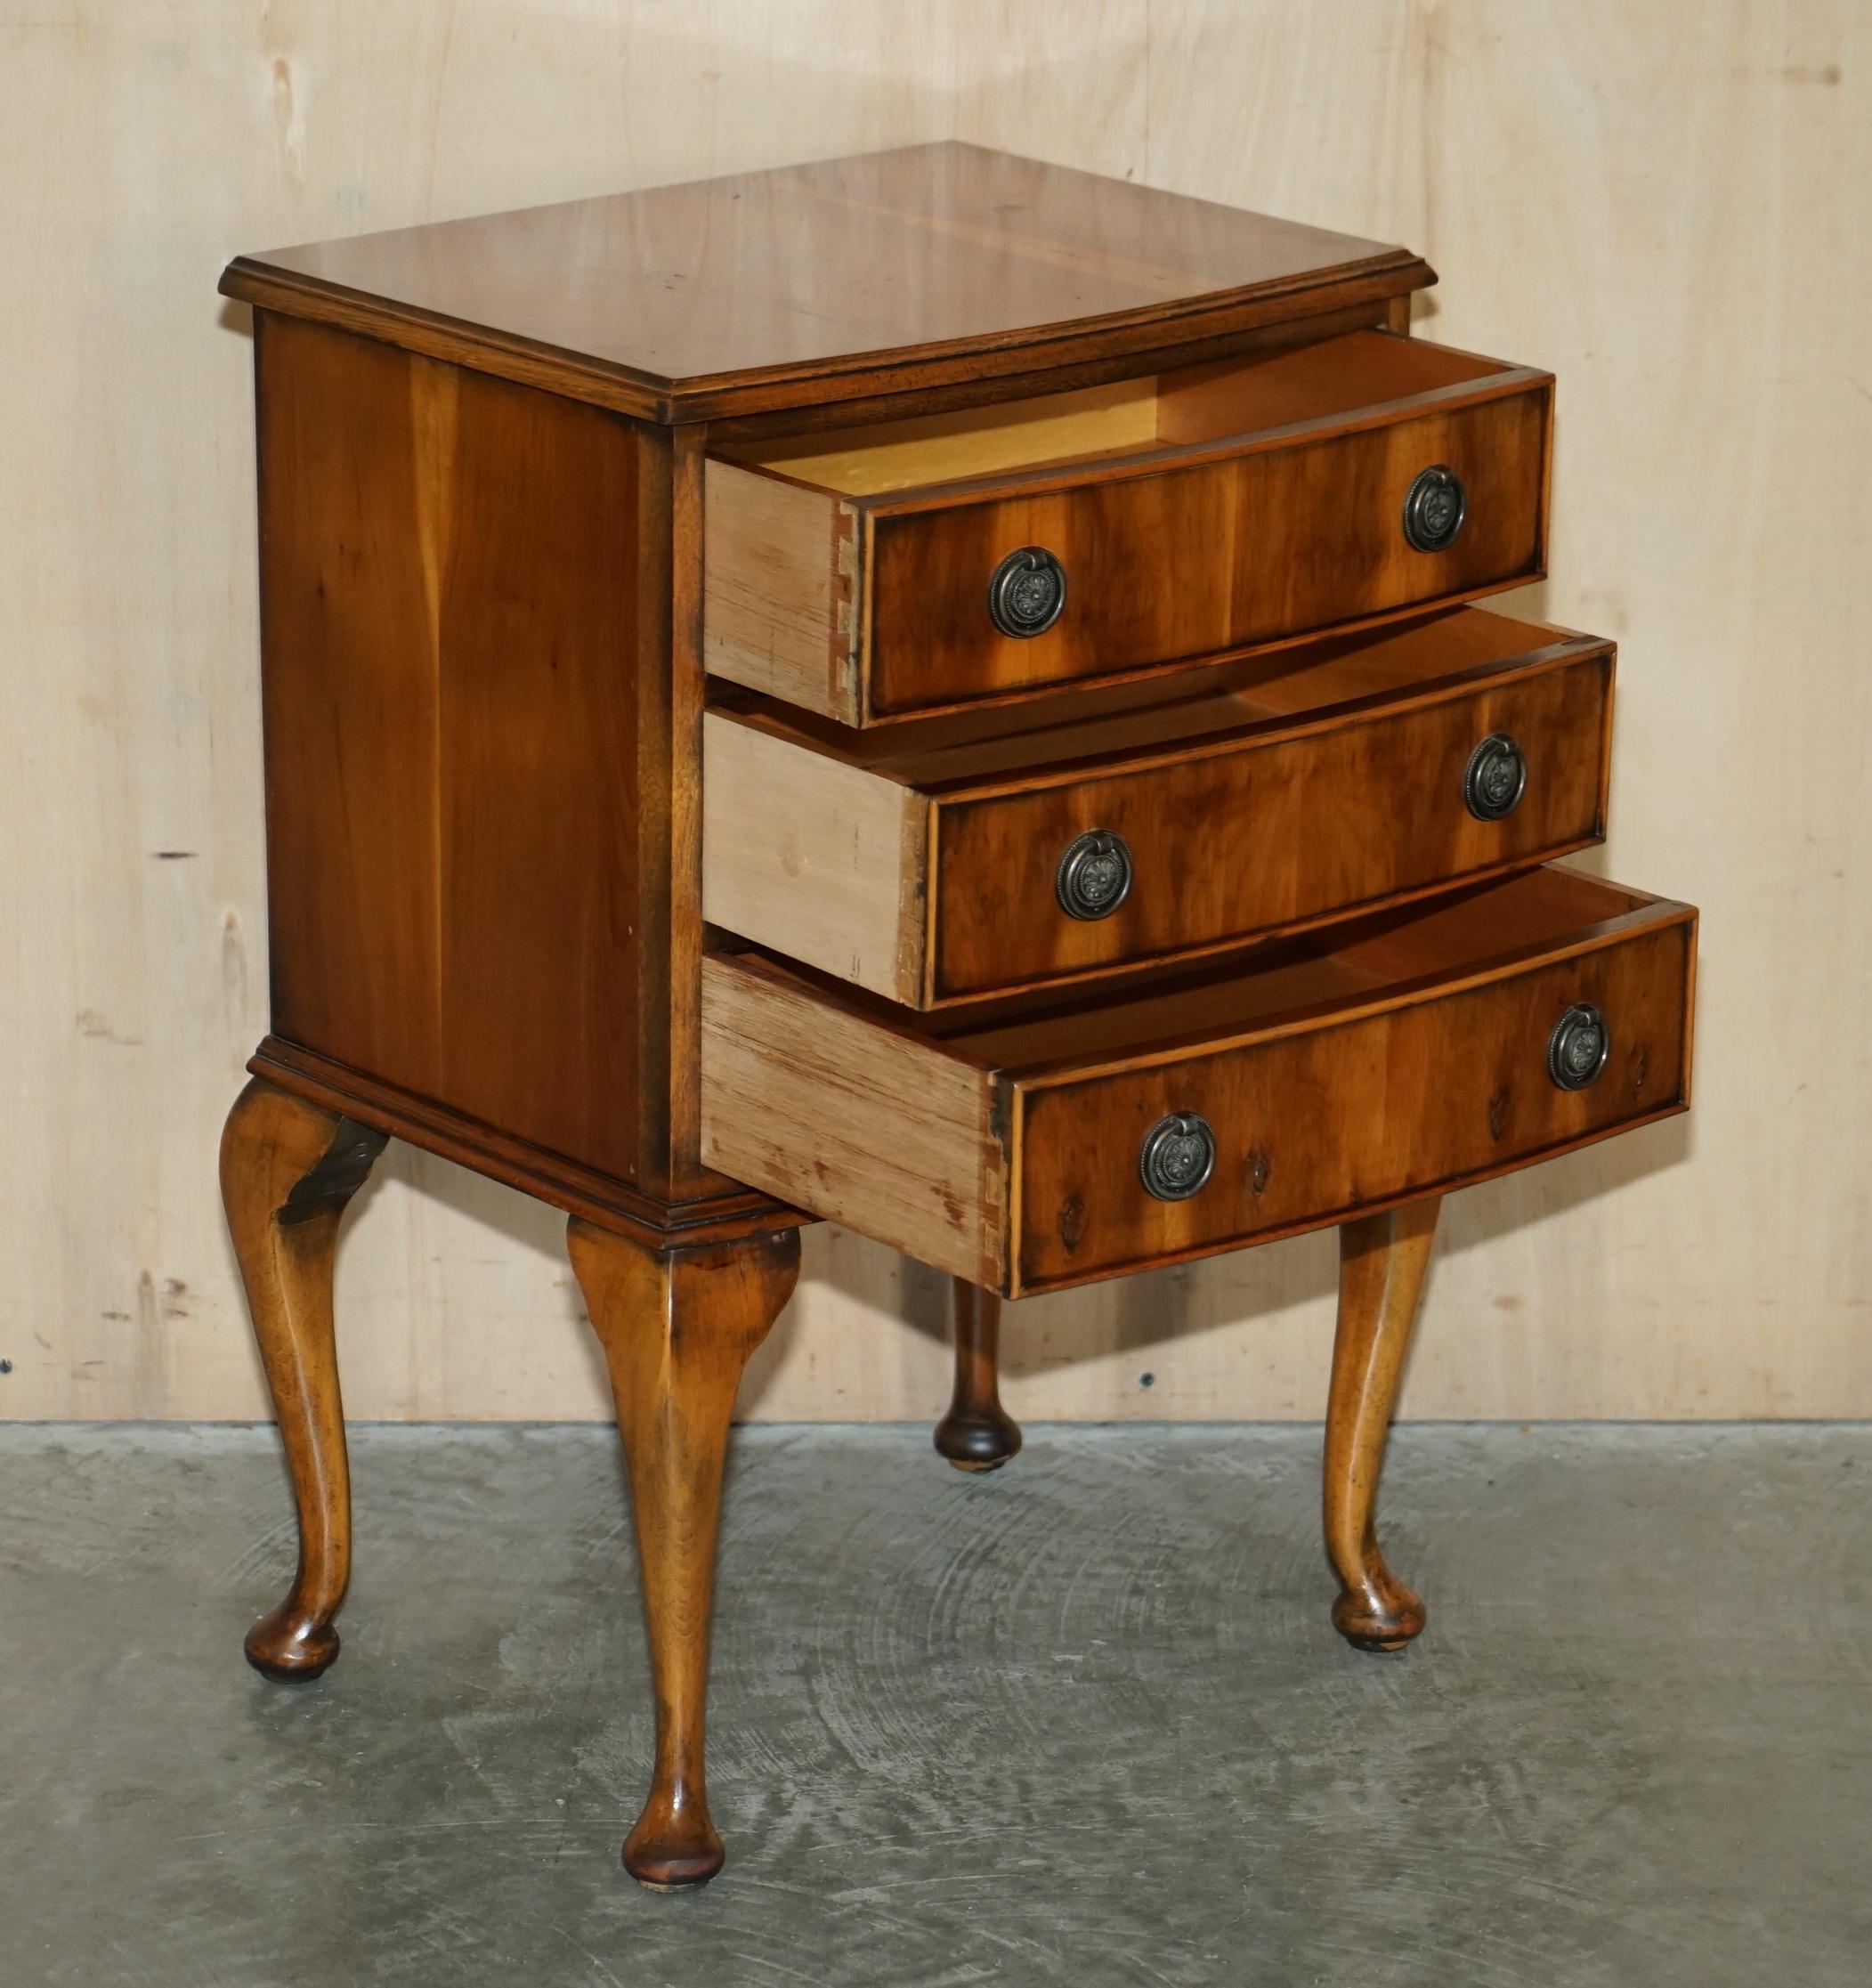 CIRCA 1940''s BURR YEW WOOD BOW FRONTED BEDSIDE SIDE TABLE CHEST OF DRAWERS im Angebot 10